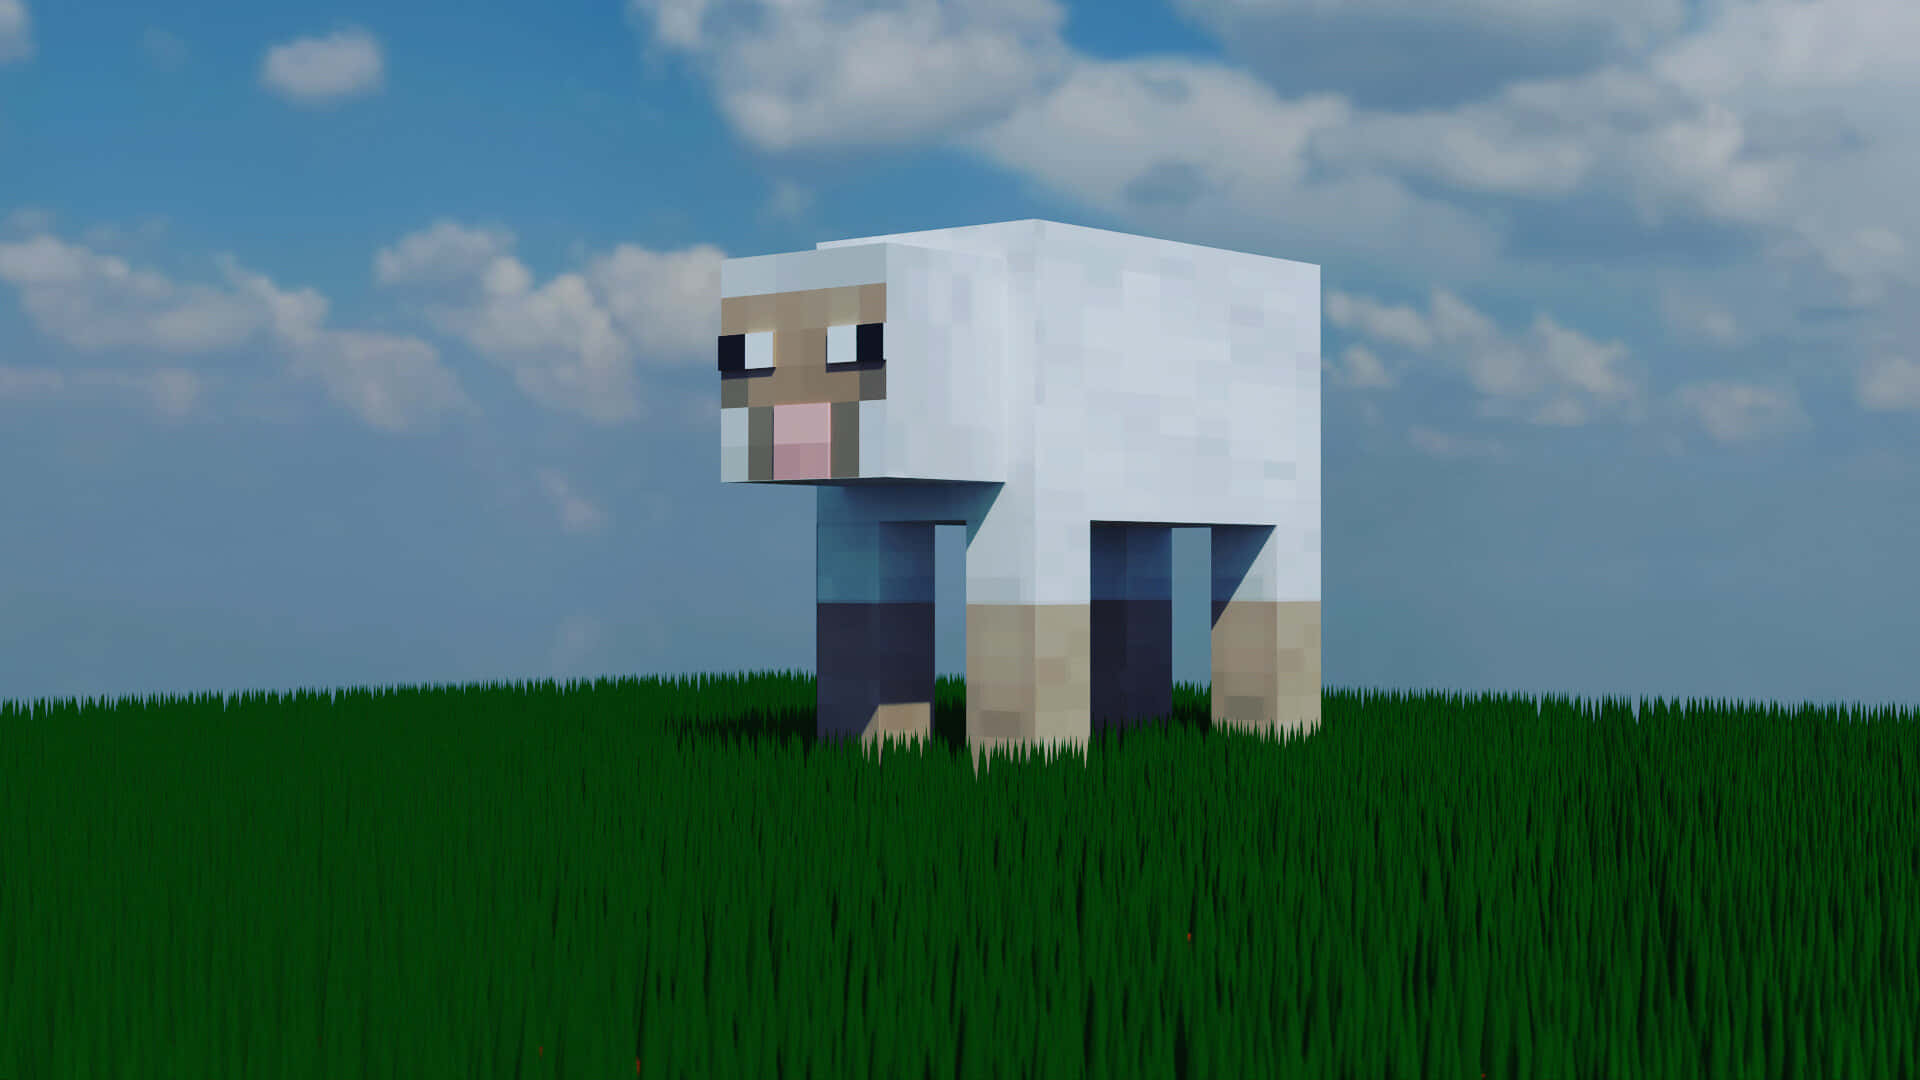 Colorful Minecraft Sheep grazing in a pixelated landscape Wallpaper